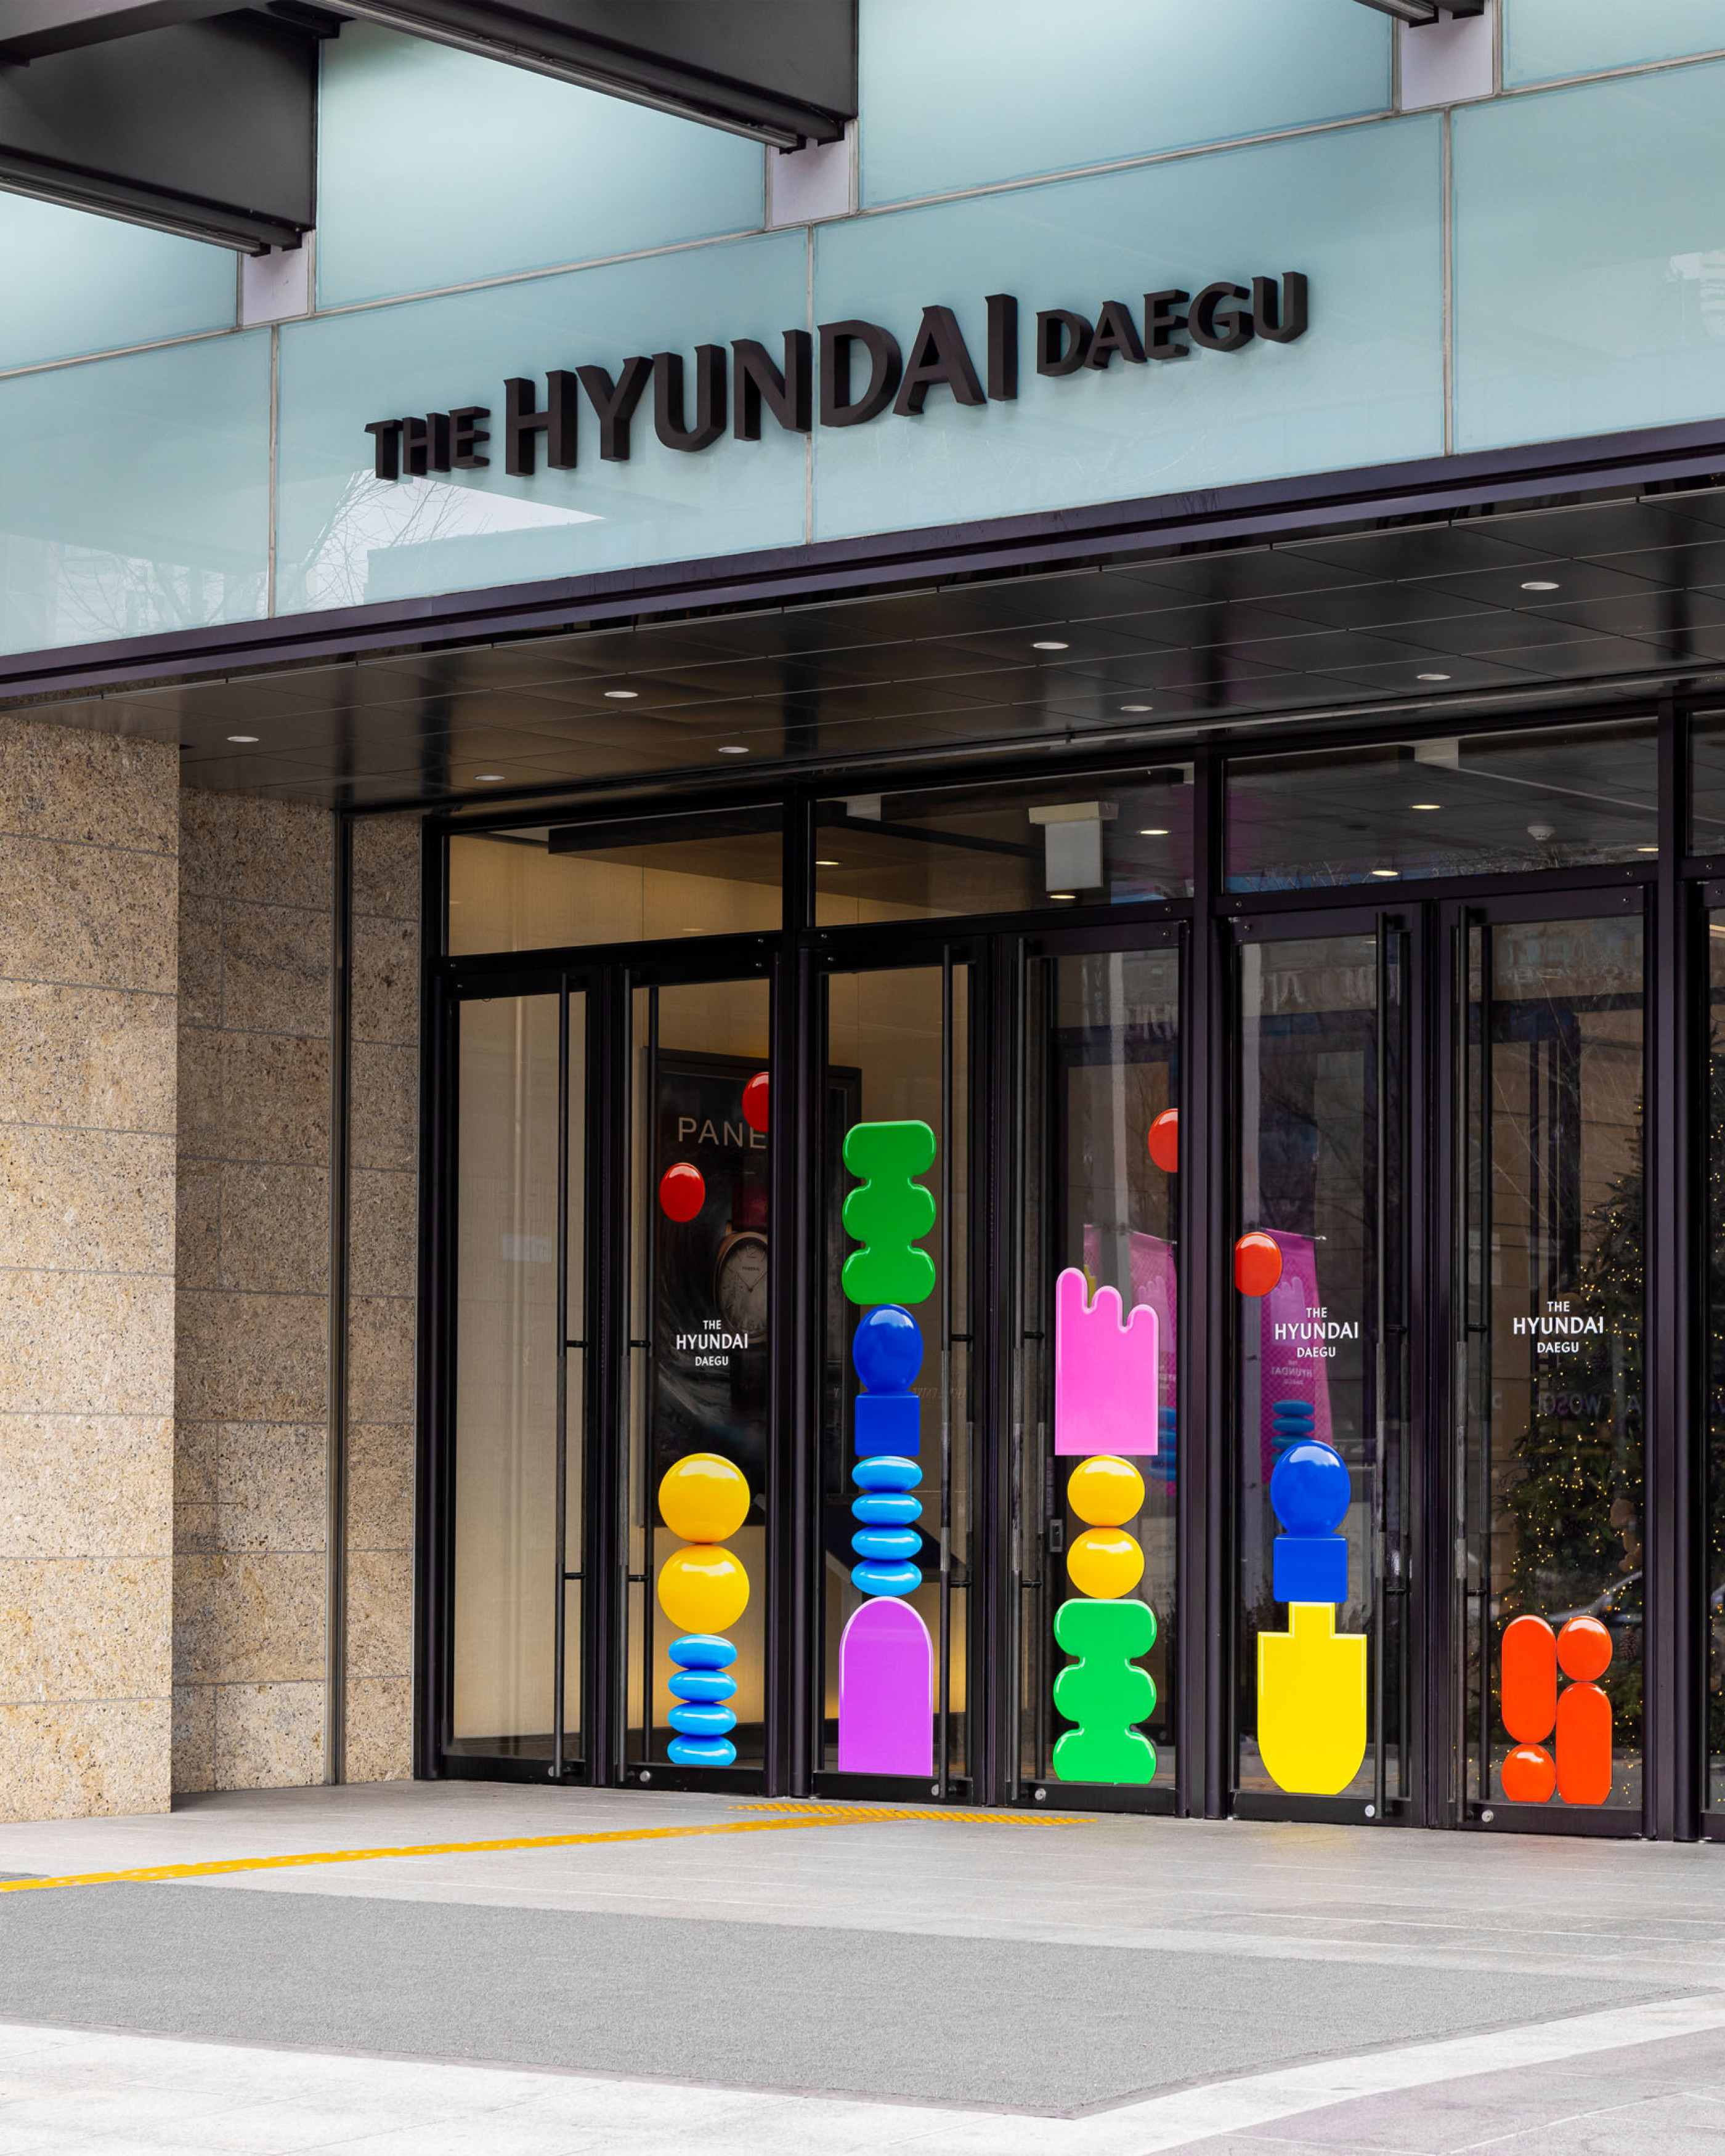 Super graphics as part of a campaign for the Hyundai Department Store in Daegu.